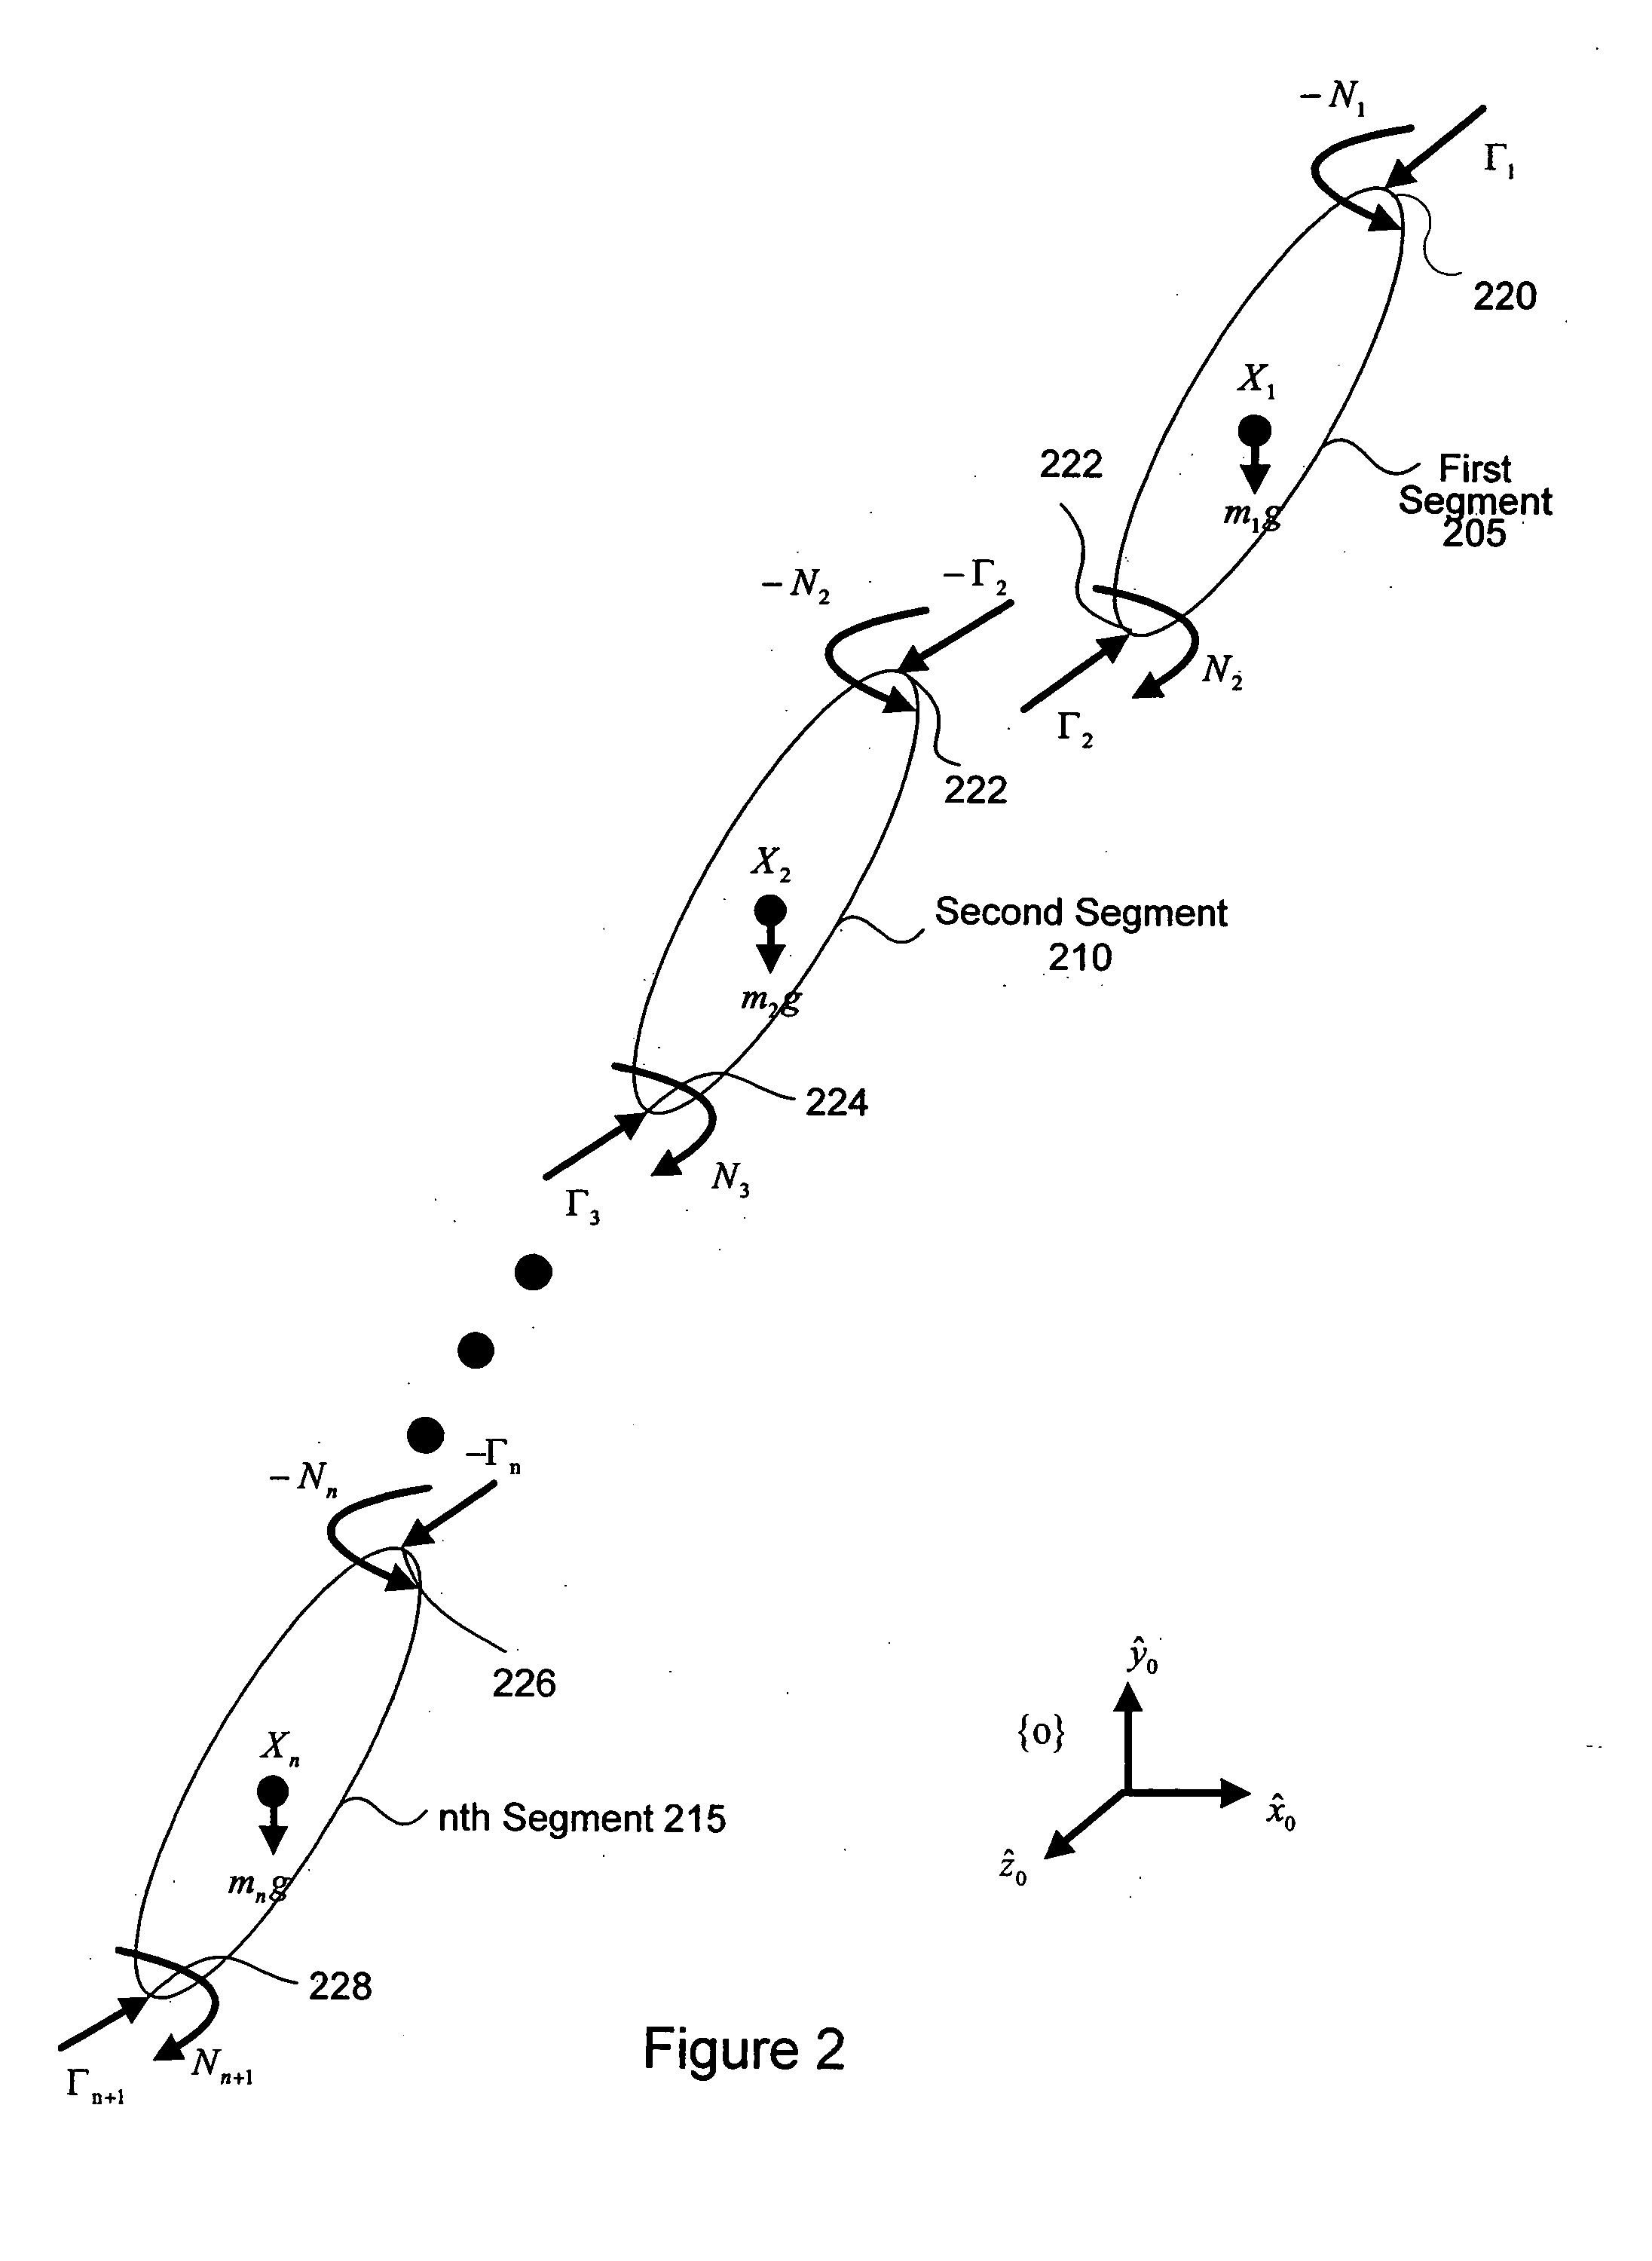 System and method of estimating joint loads in a three-dimensional system